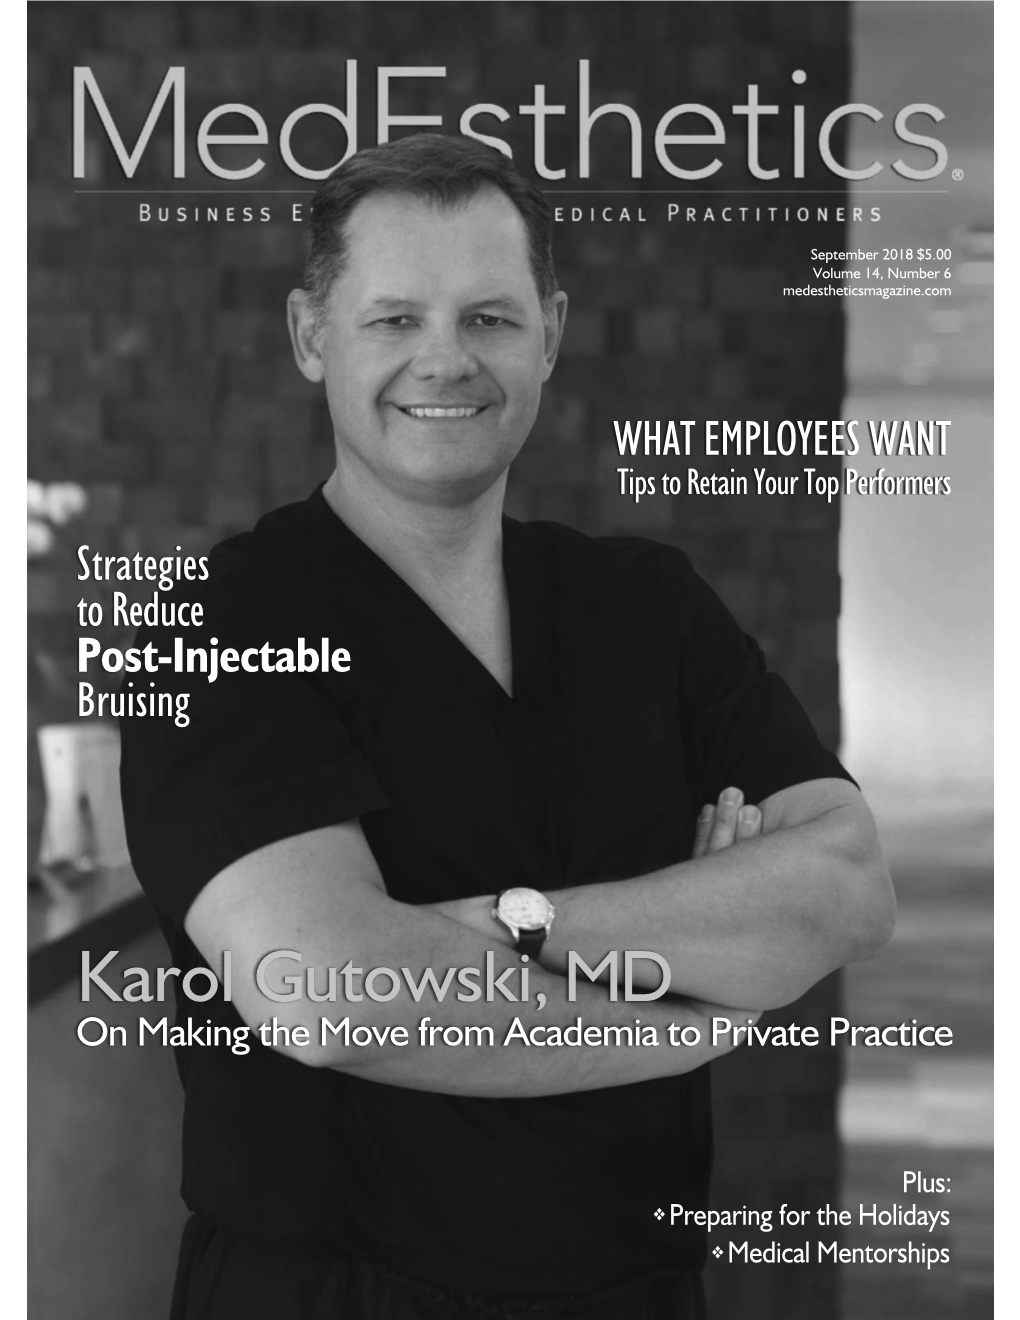 Karol Gutowski, MD on Making the Move from Academia to Private Practice